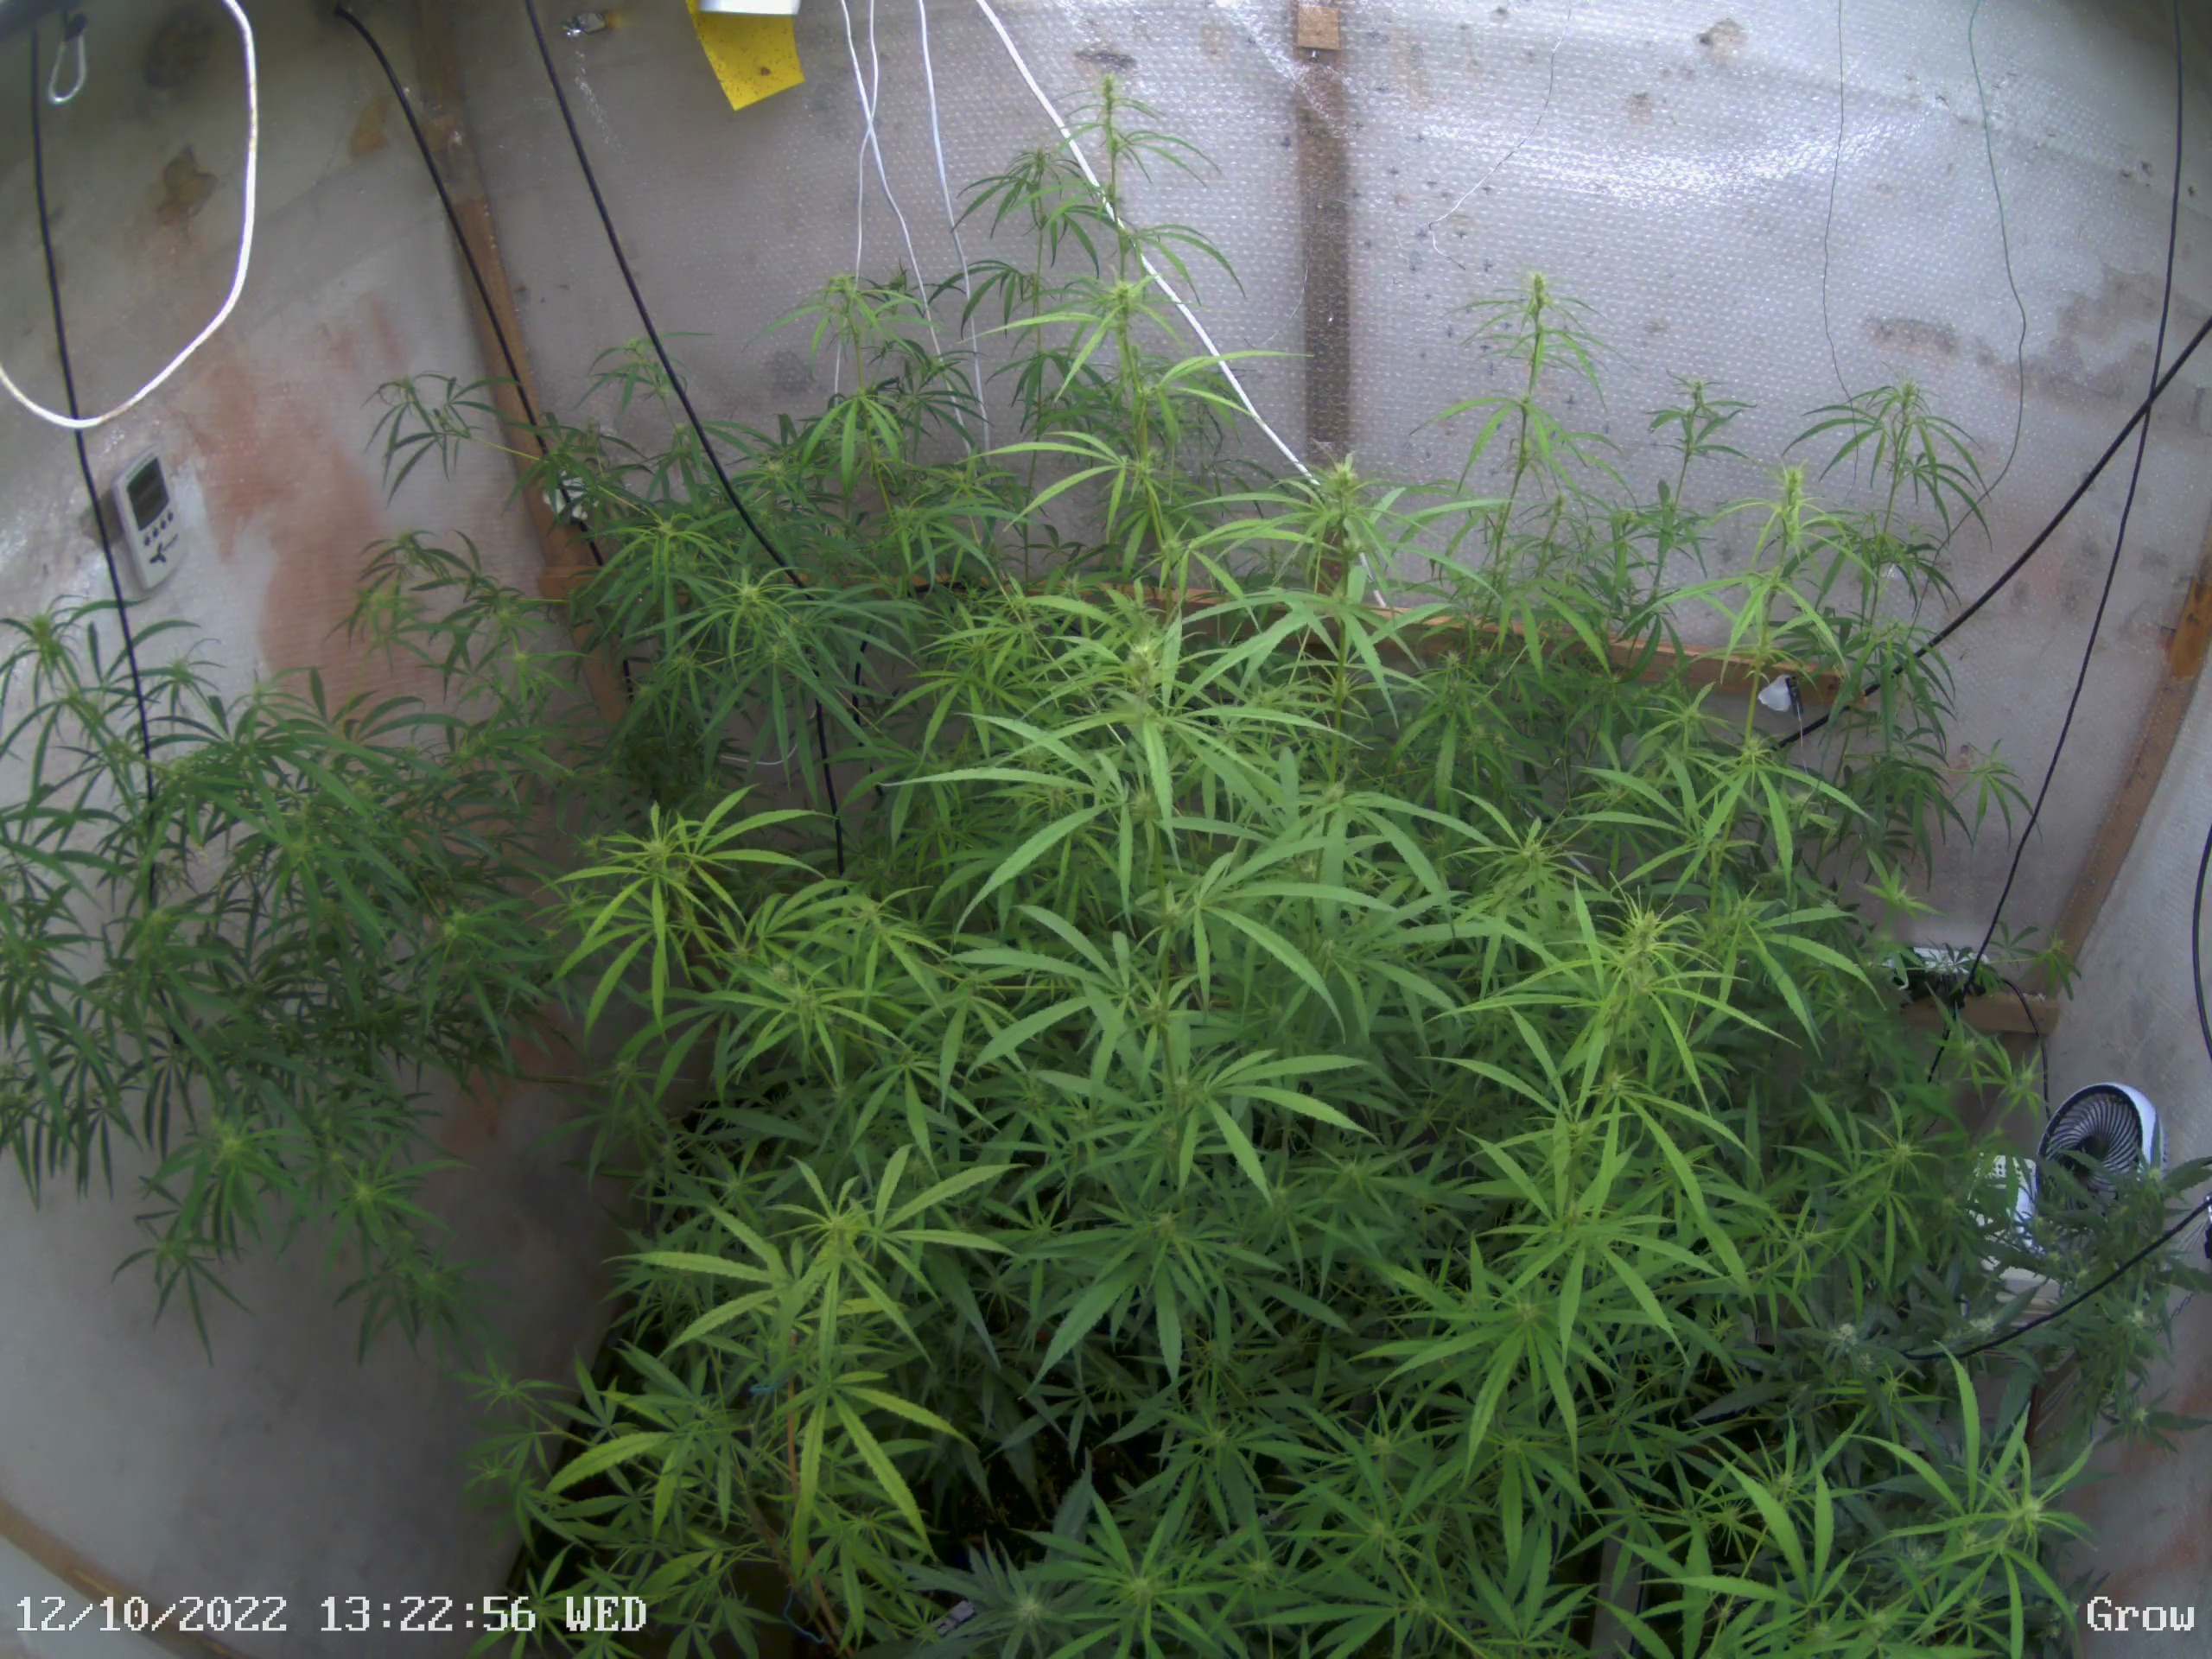 Grow CH01 at Wednesday, 12. October 2022 at 13:23:01 Central European Summer Time.jpeg